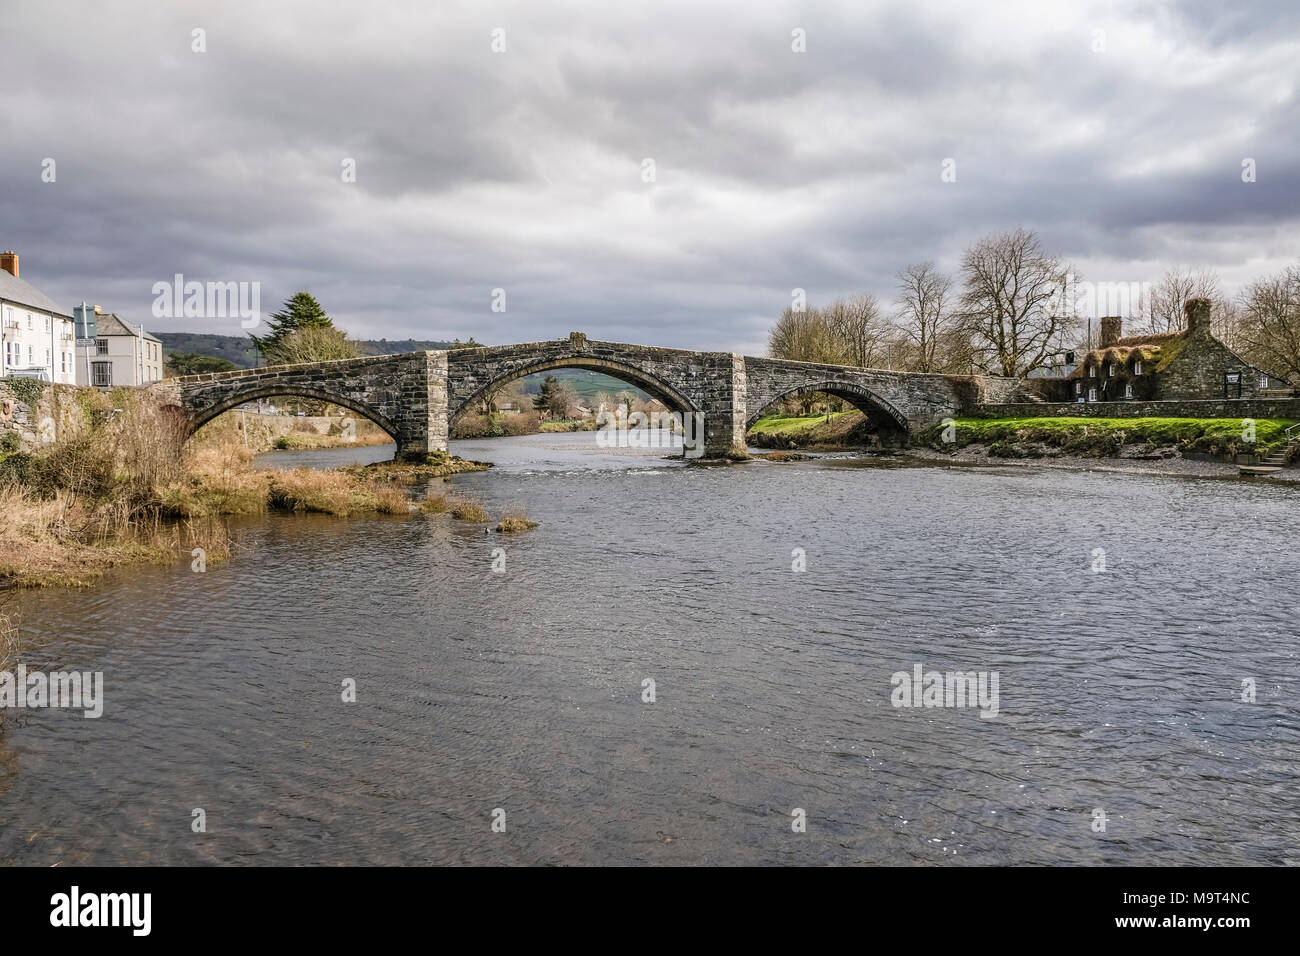 Pont Fawr, A Narrow three arch stone bridge in the Welsh town of Llanrwst, North Wales, UK Stock Photo